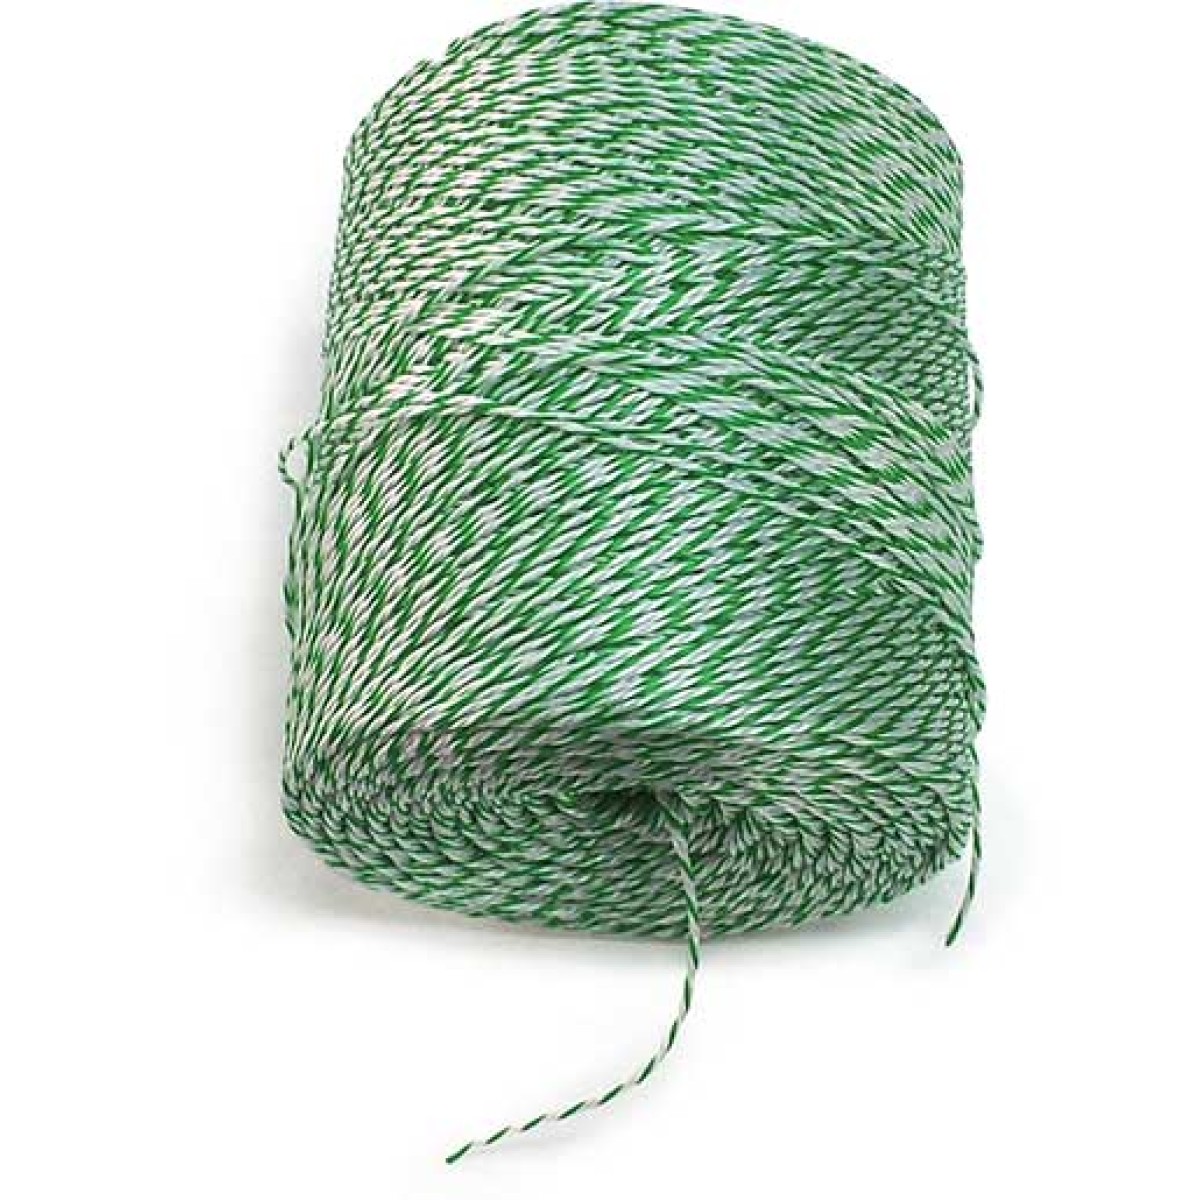 TWINE - GOURMET (DK GREEN AND WHITE) 560m